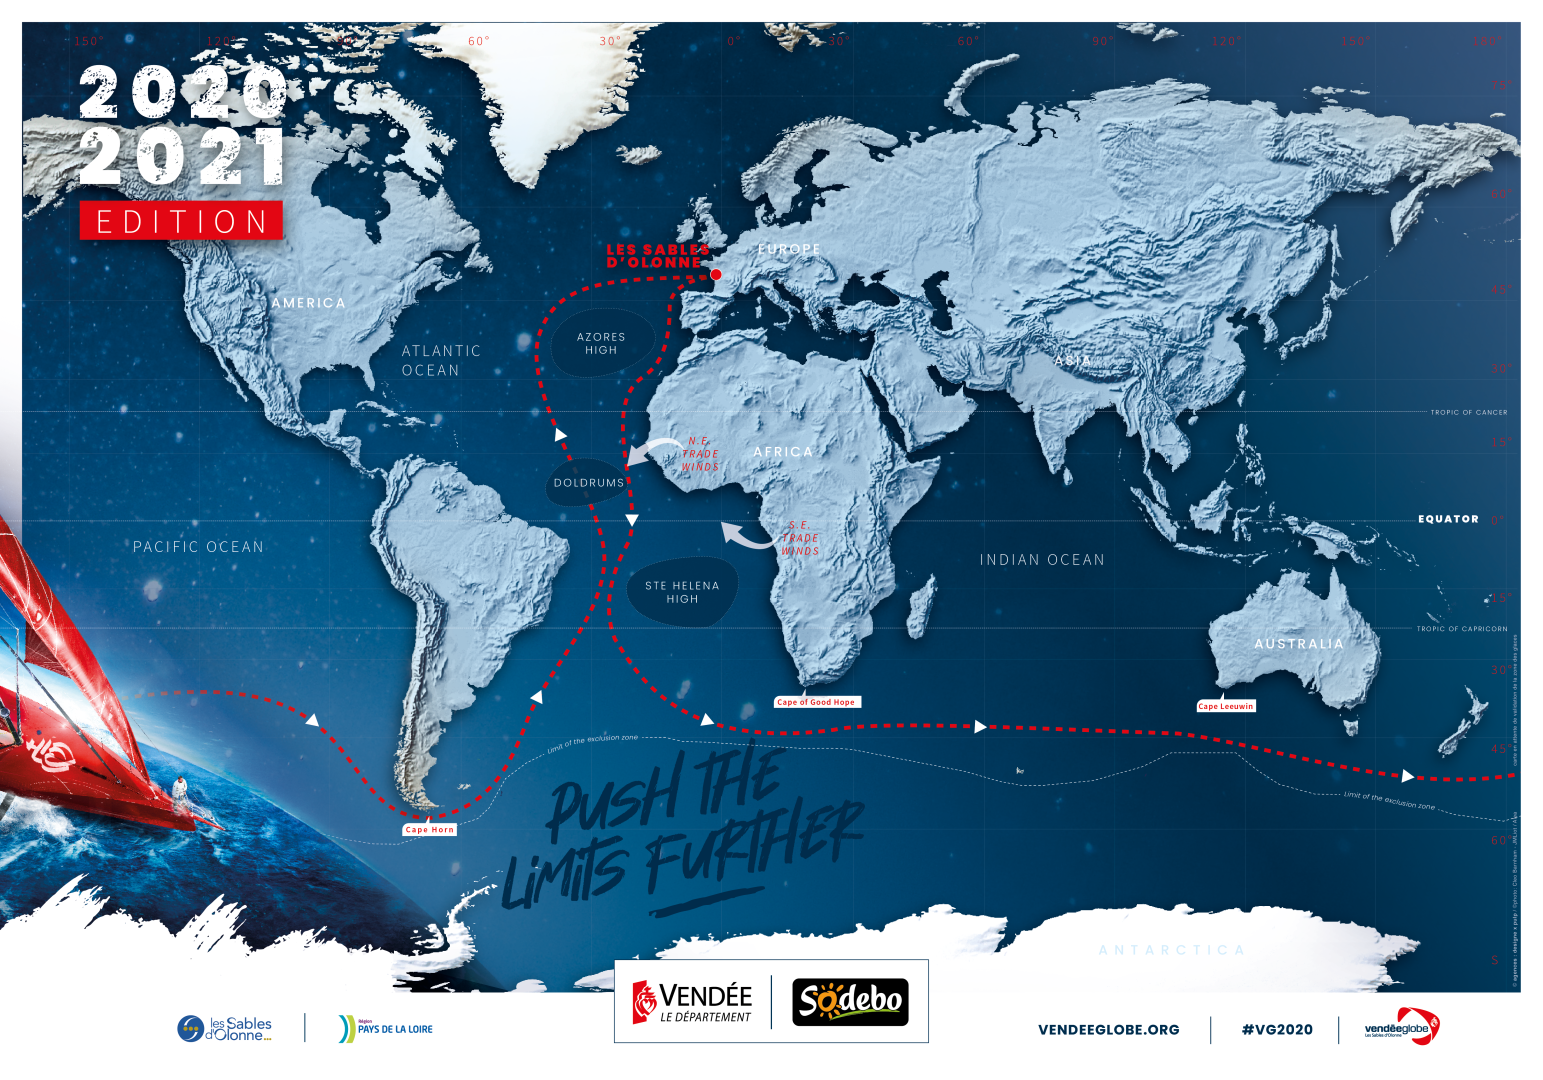 A muted departure should give way to a triumphant, fast Vendée Globe start on sunday